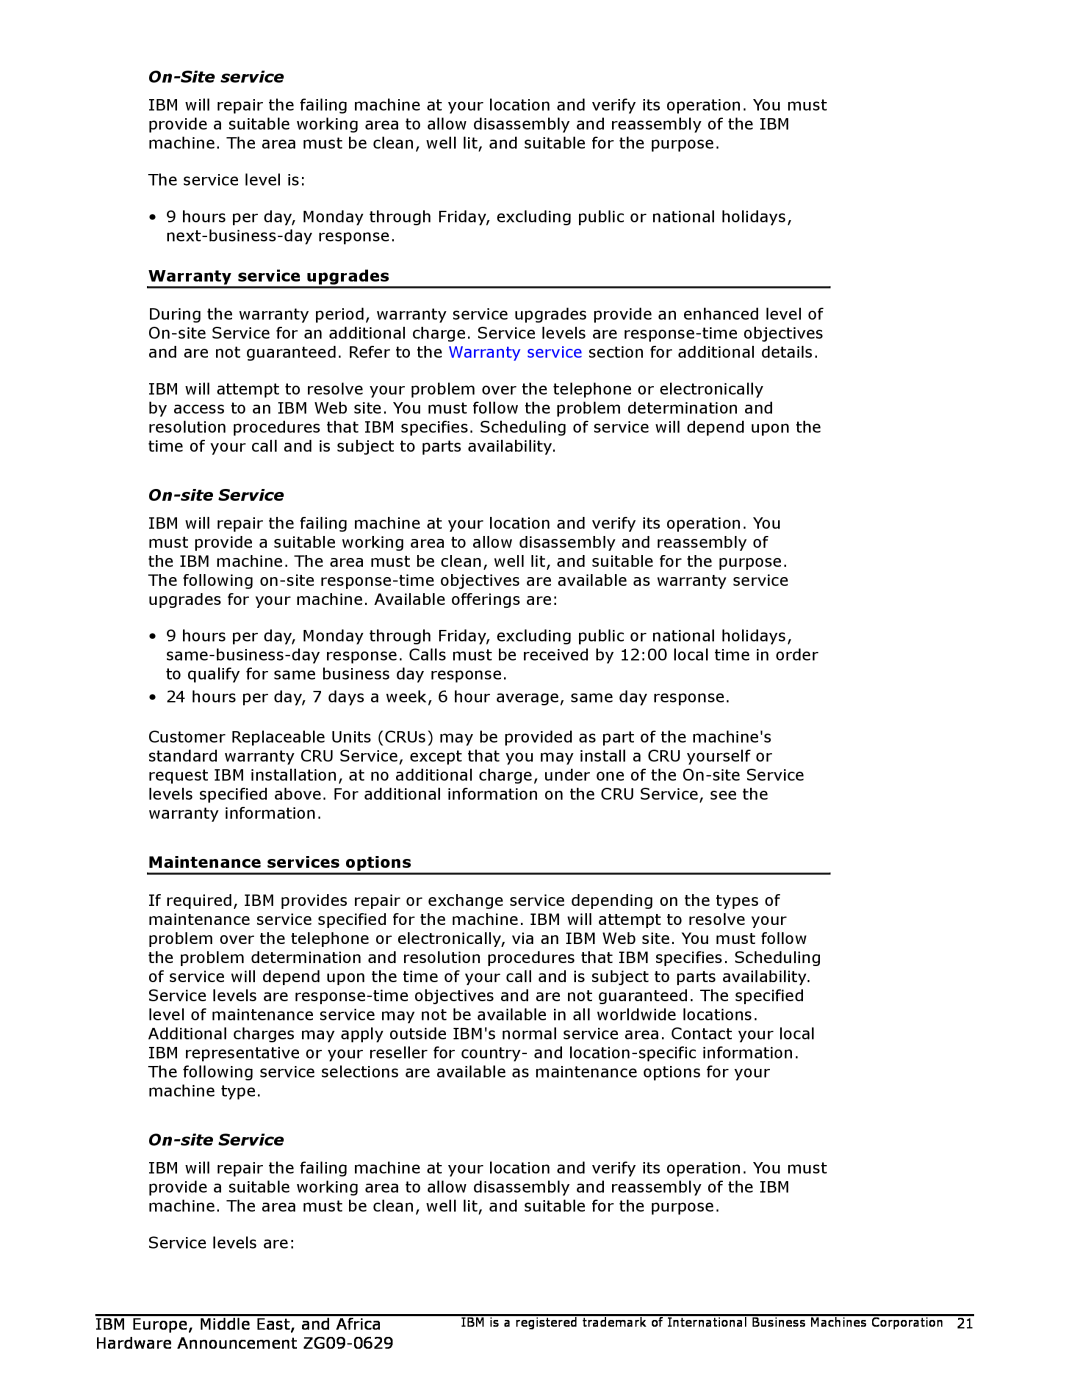 IBM ZG09-0629 manual On-Siteservice, On-siteService, The service level is 